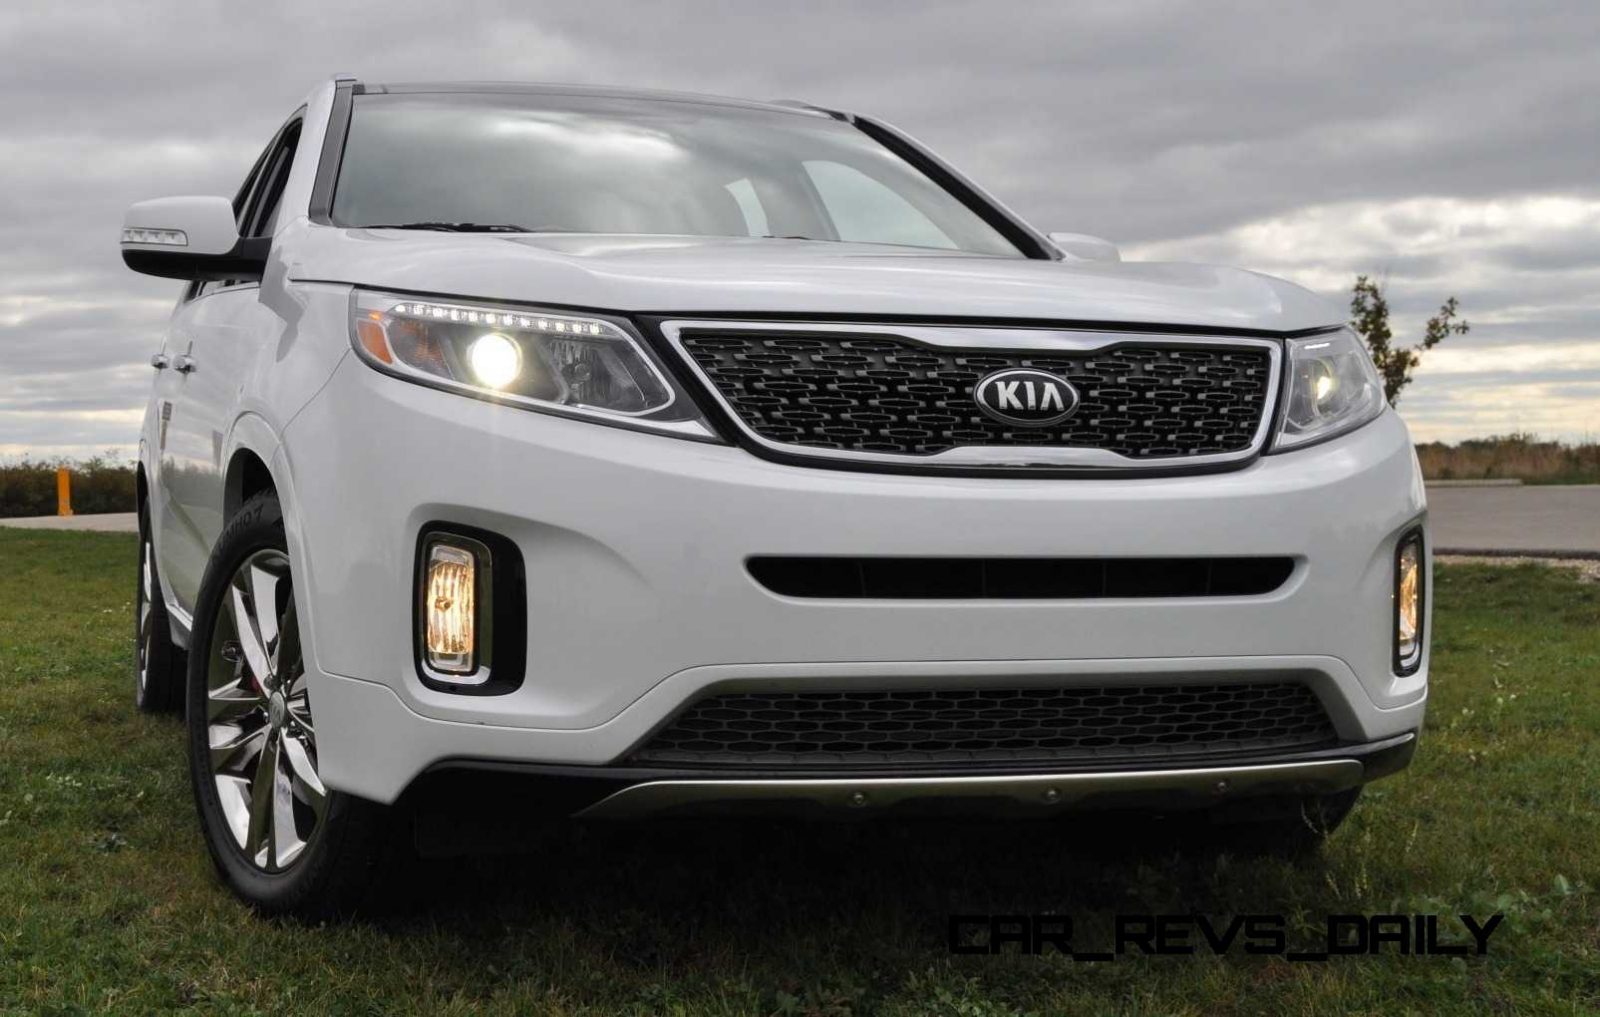 DRIVEN REVIEW: 2014 Kia Sorento SX-L Feels Lux Inside, But Steering Is ...